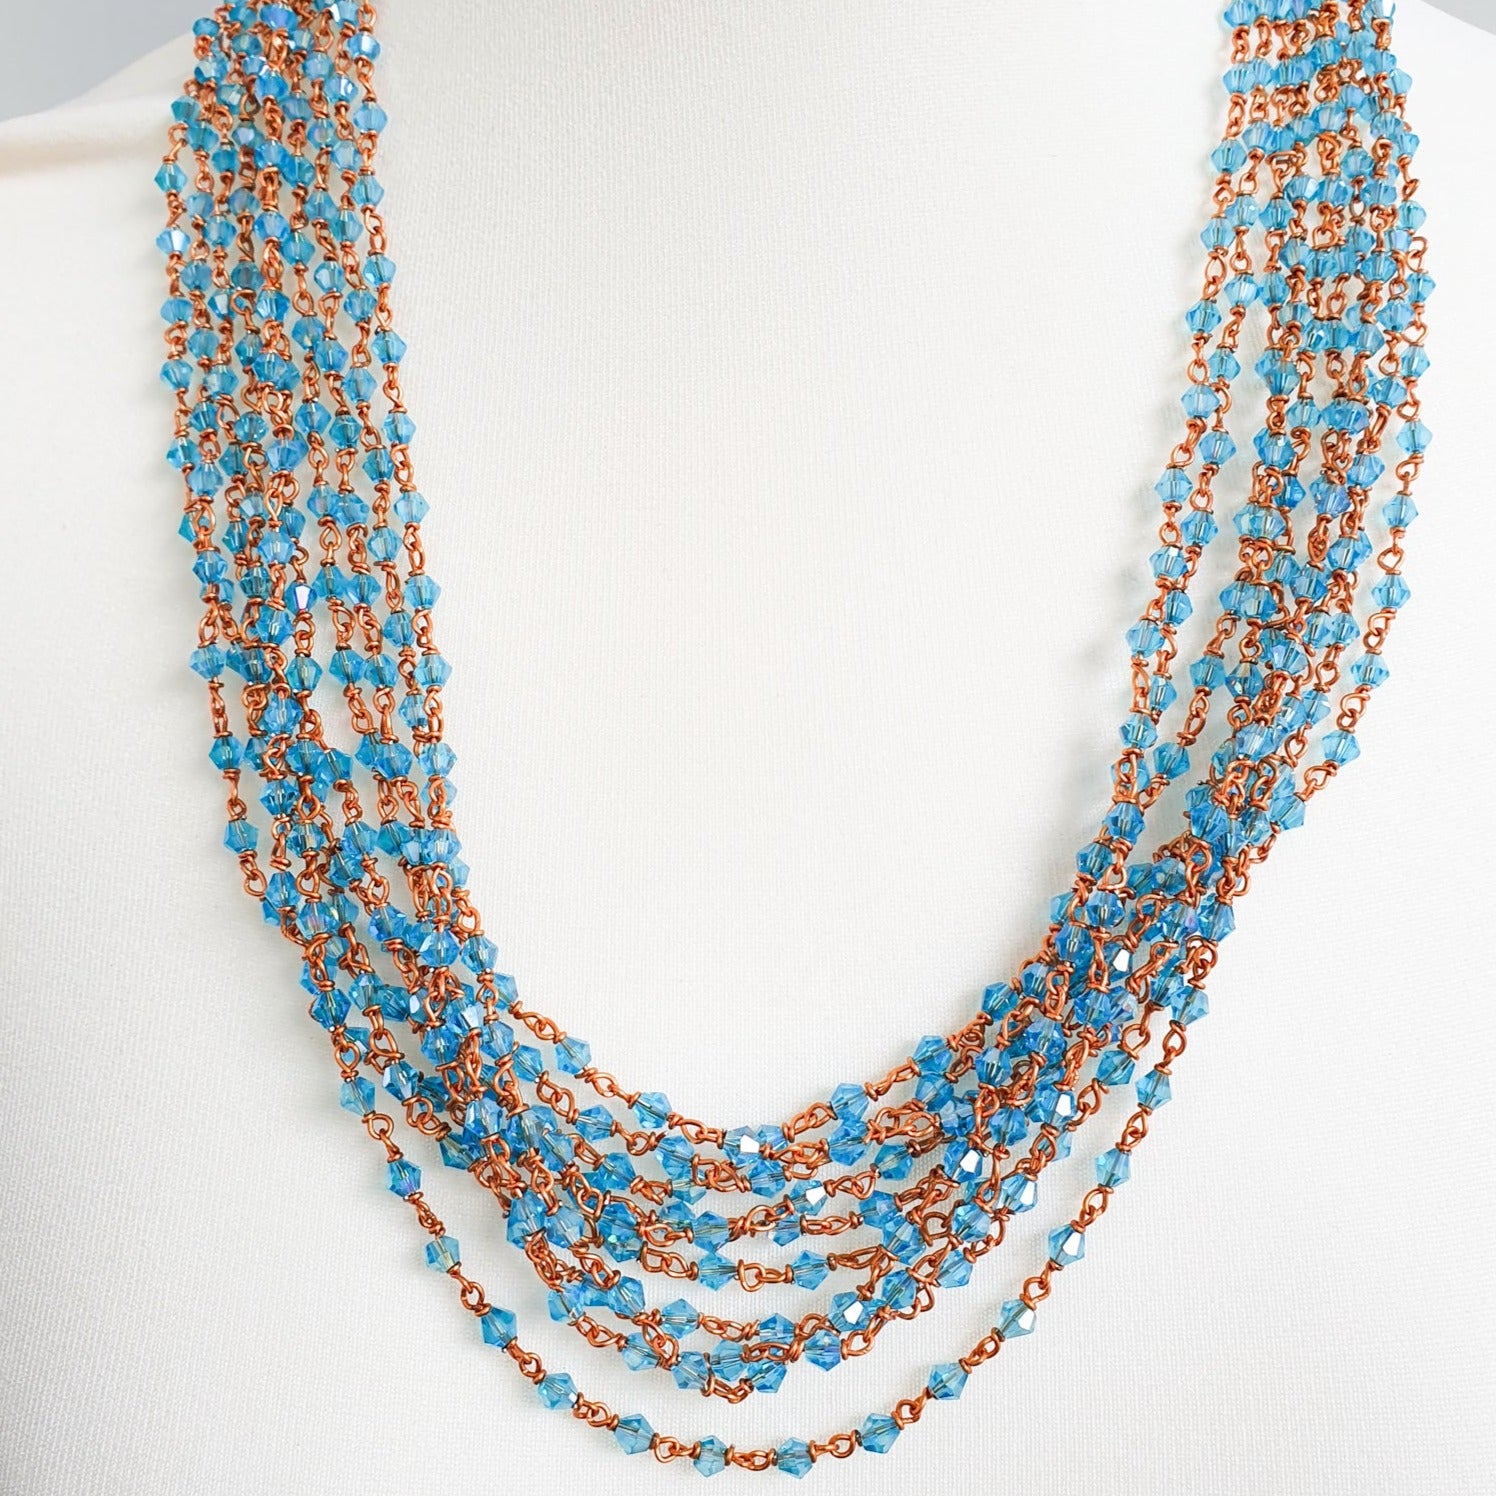 Making Bead Necklace Patterns With Glass Beads · How To Make A Beaded  Pendant · Jewelry on Cut Out + Keep